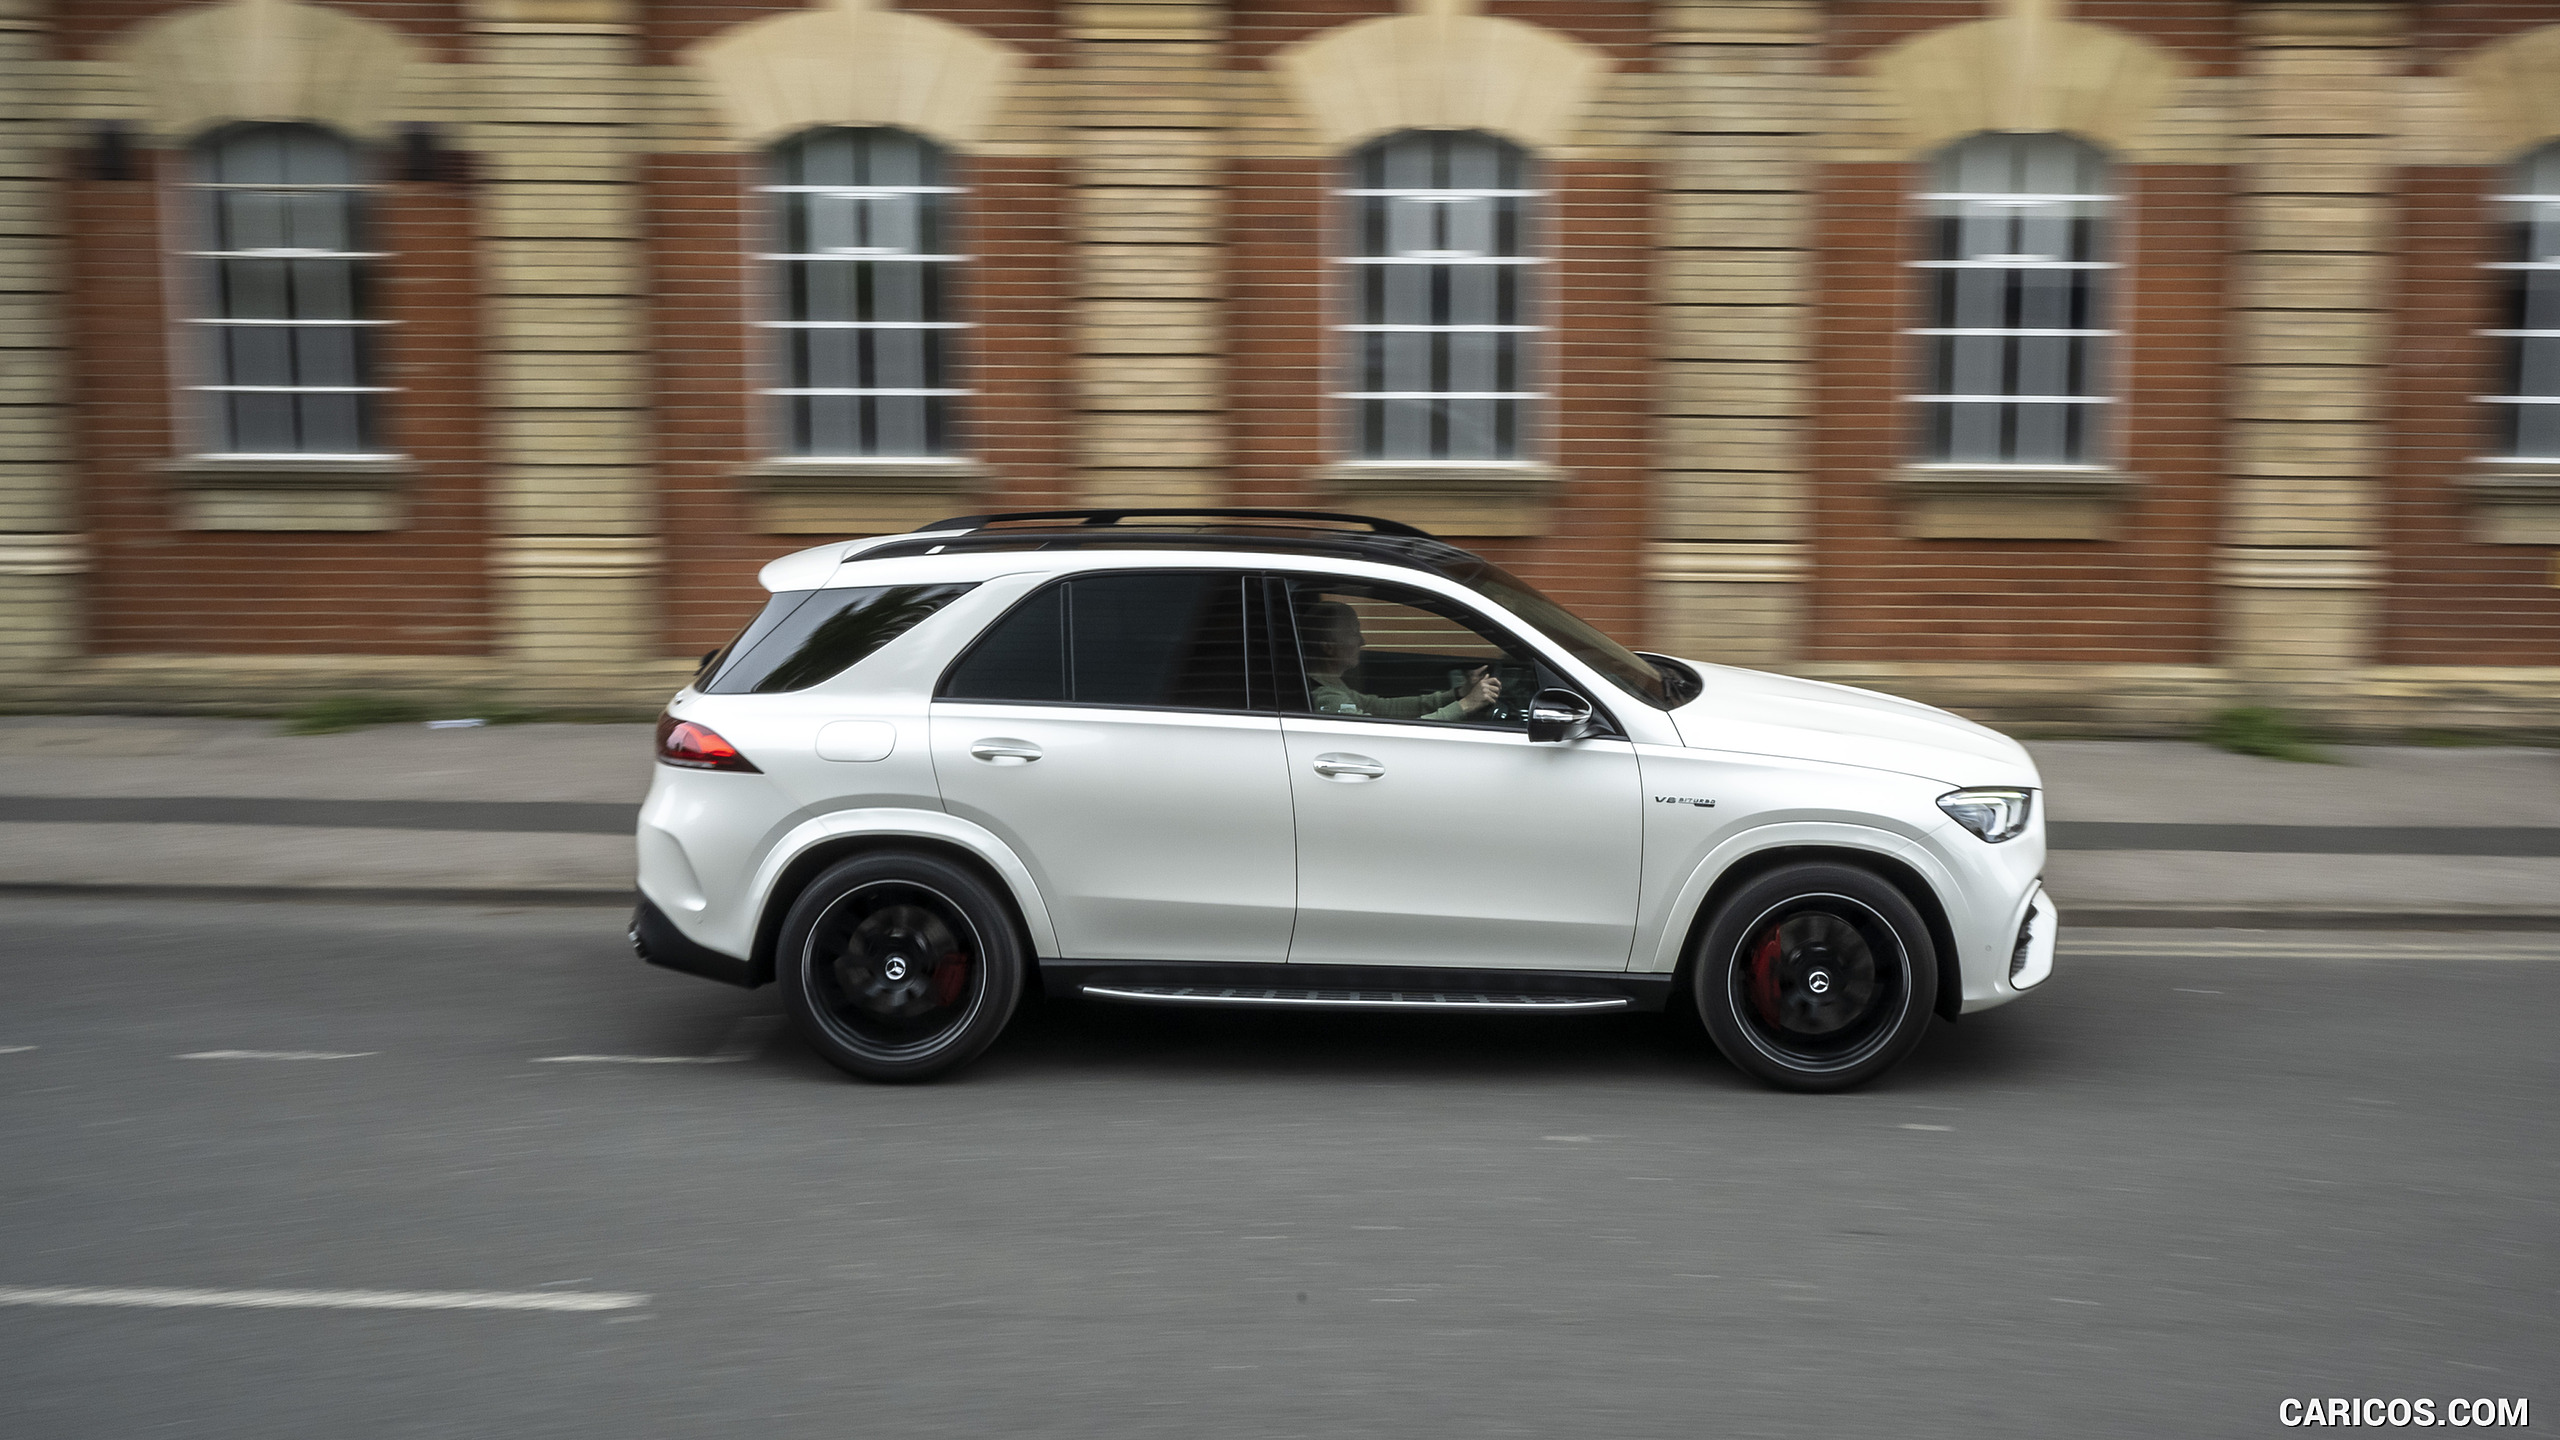 2021 Mercedes-AMG GLE 63 S 4MATIC (UK-Spec) - Side, #130 of 187